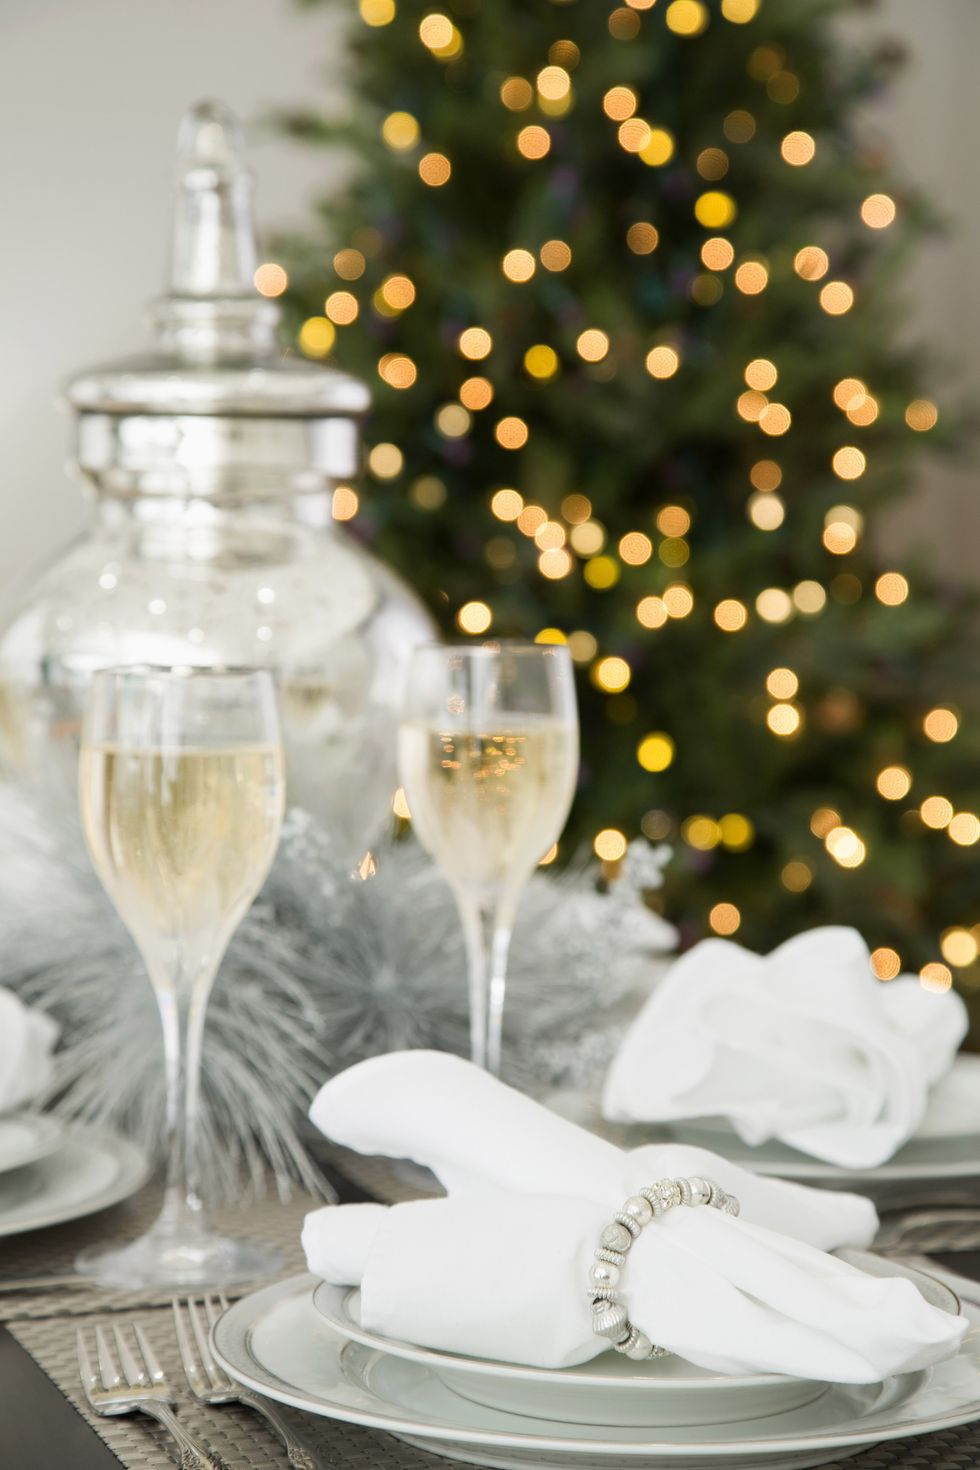 <p>The more champagne glasses, the more holiday cheer!</p>